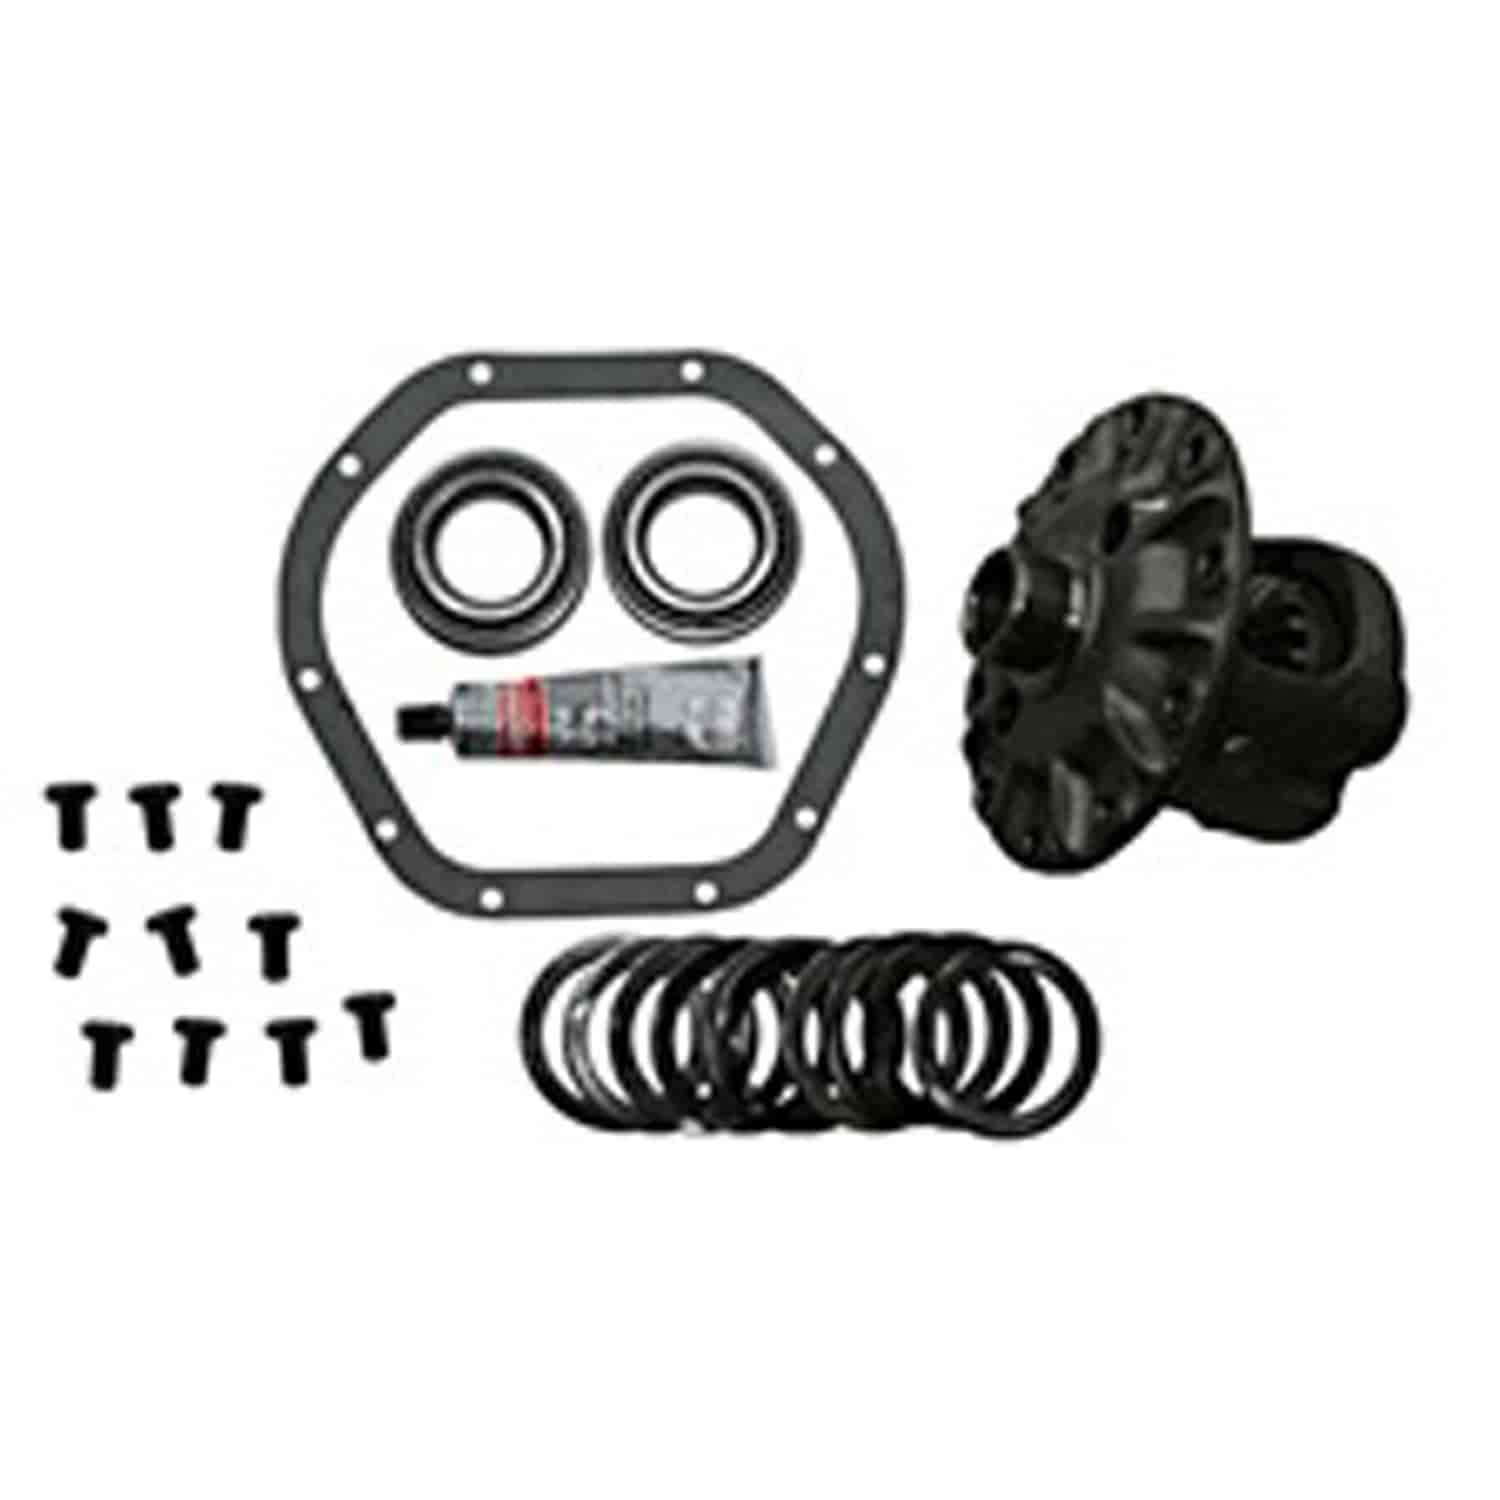 This differential case assembly kit from Omix-ADA fits